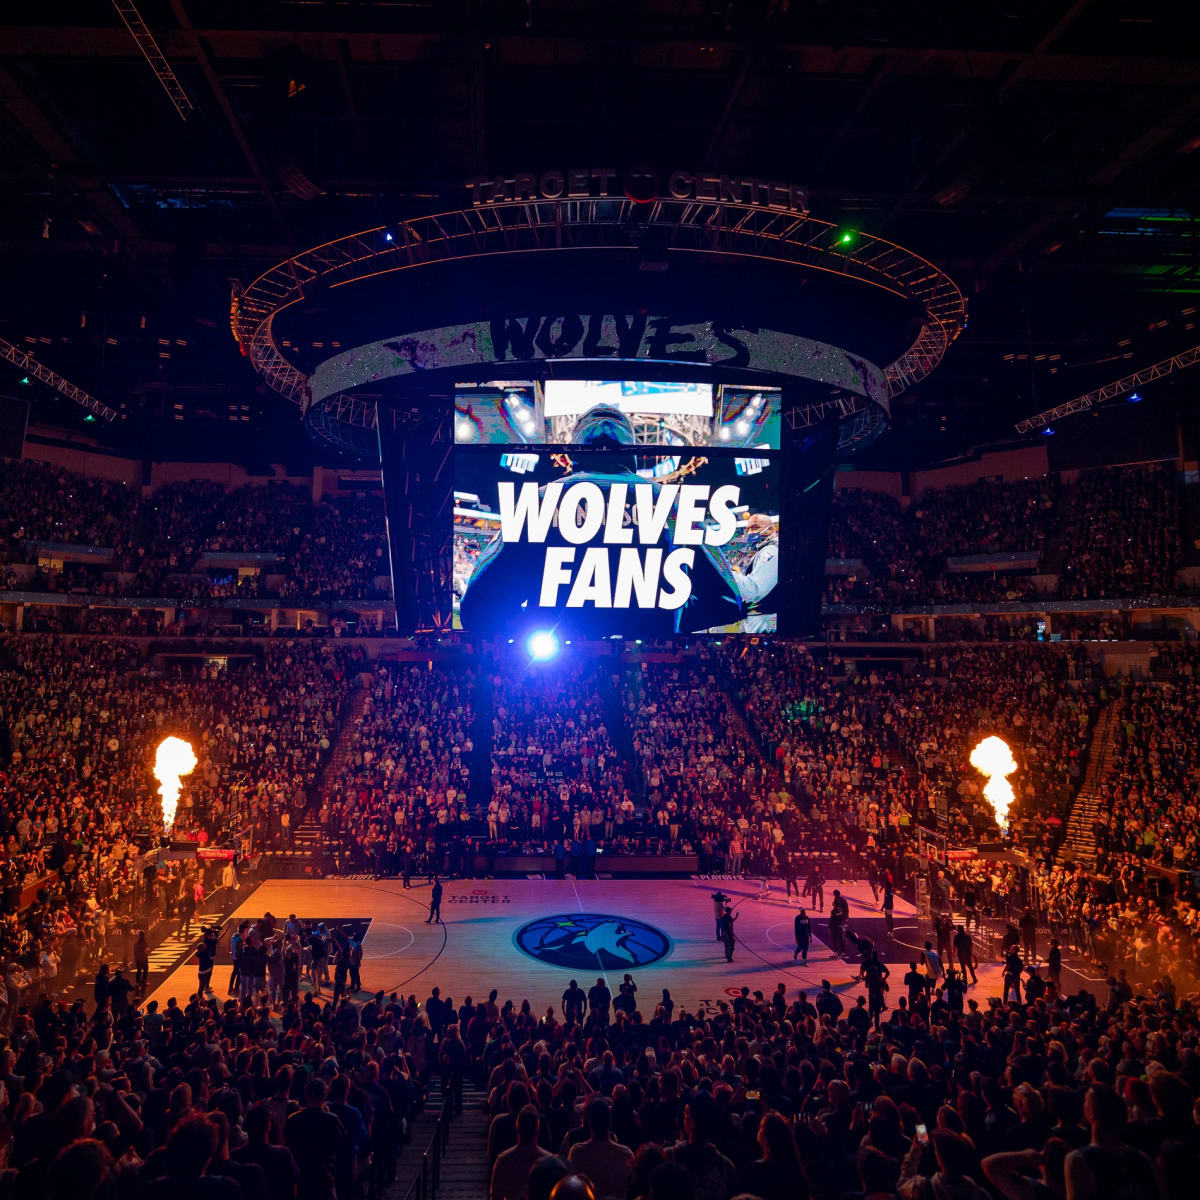 Minnesota Timberwolves and Wild host playoff games 